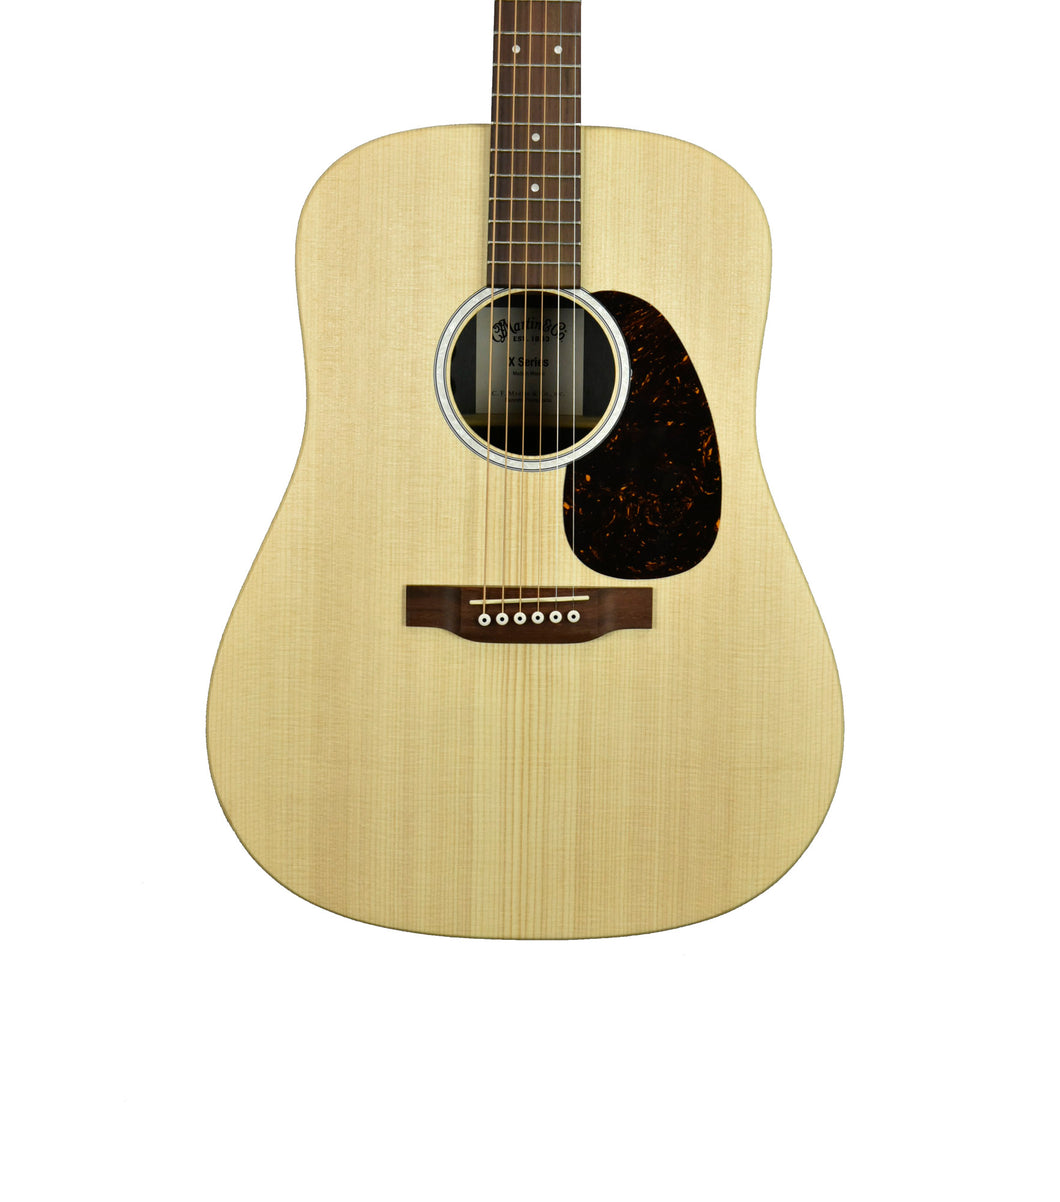 Martin D-X2E Acoustic-Electric Guitar in Natural 2718297 - The Music Gallery